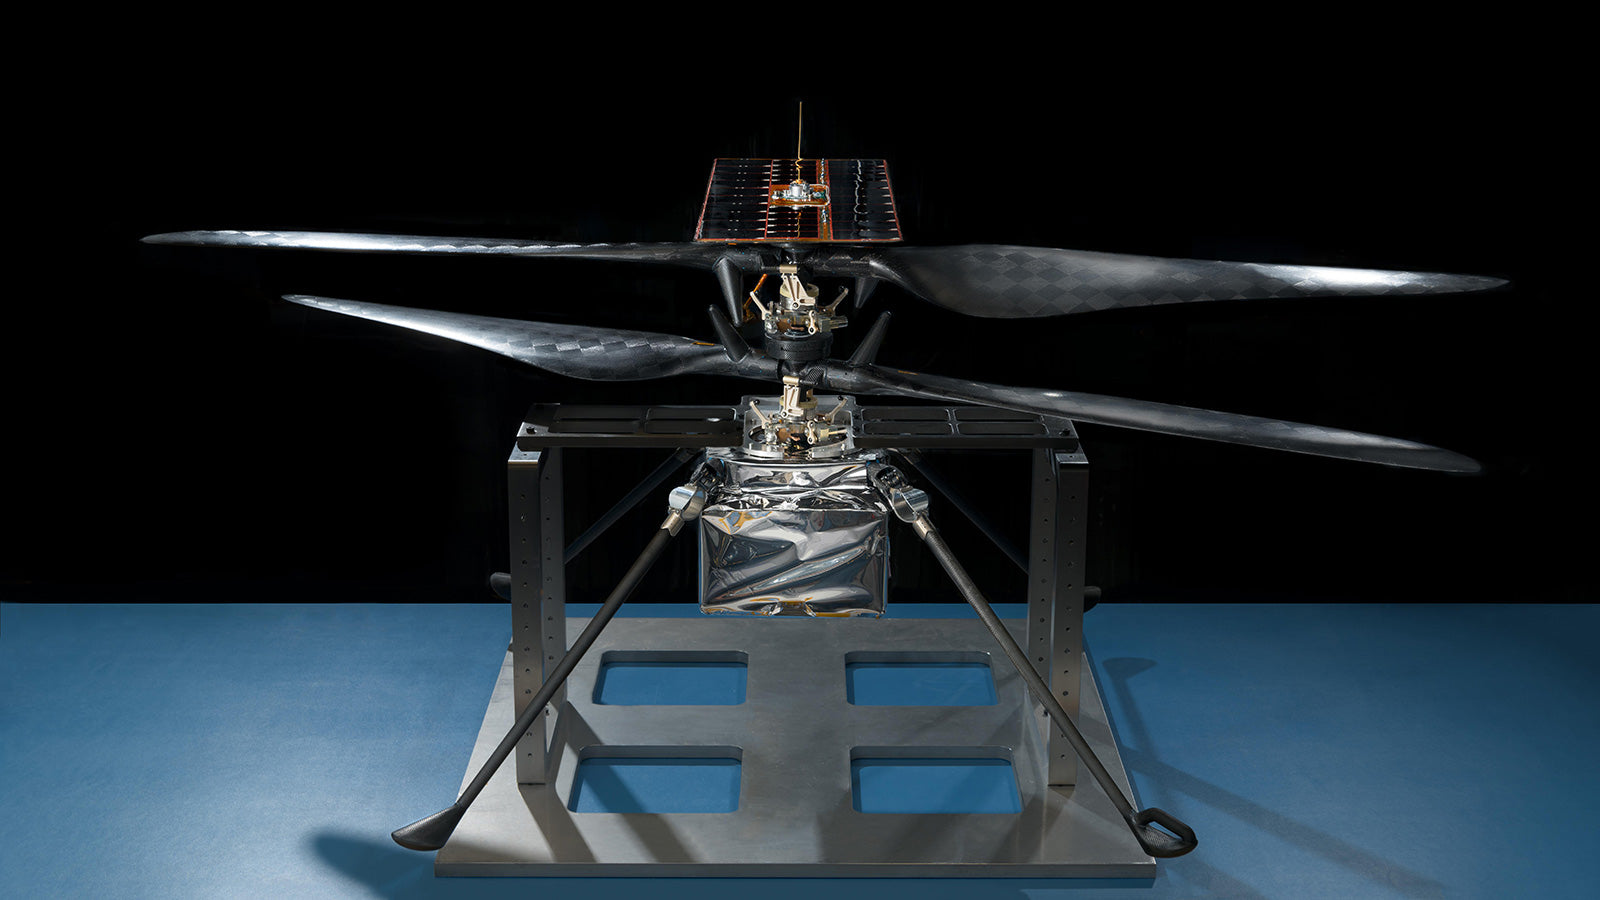 This image of the flight model of NASA's Mars Helicopter